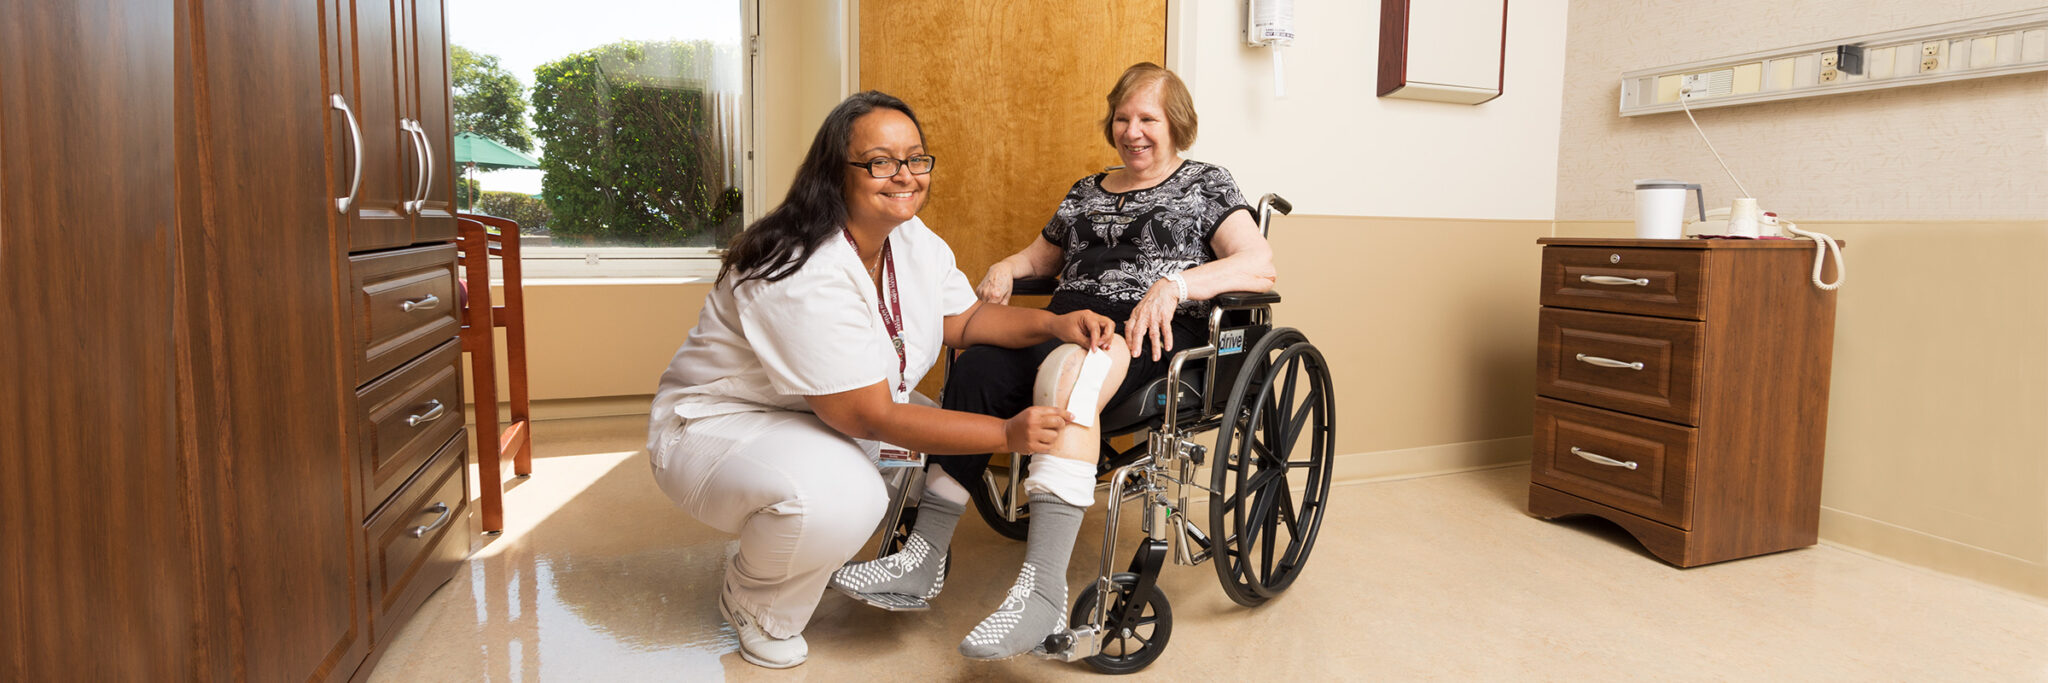 Nurse assisting patient in a wheelchair with bandage